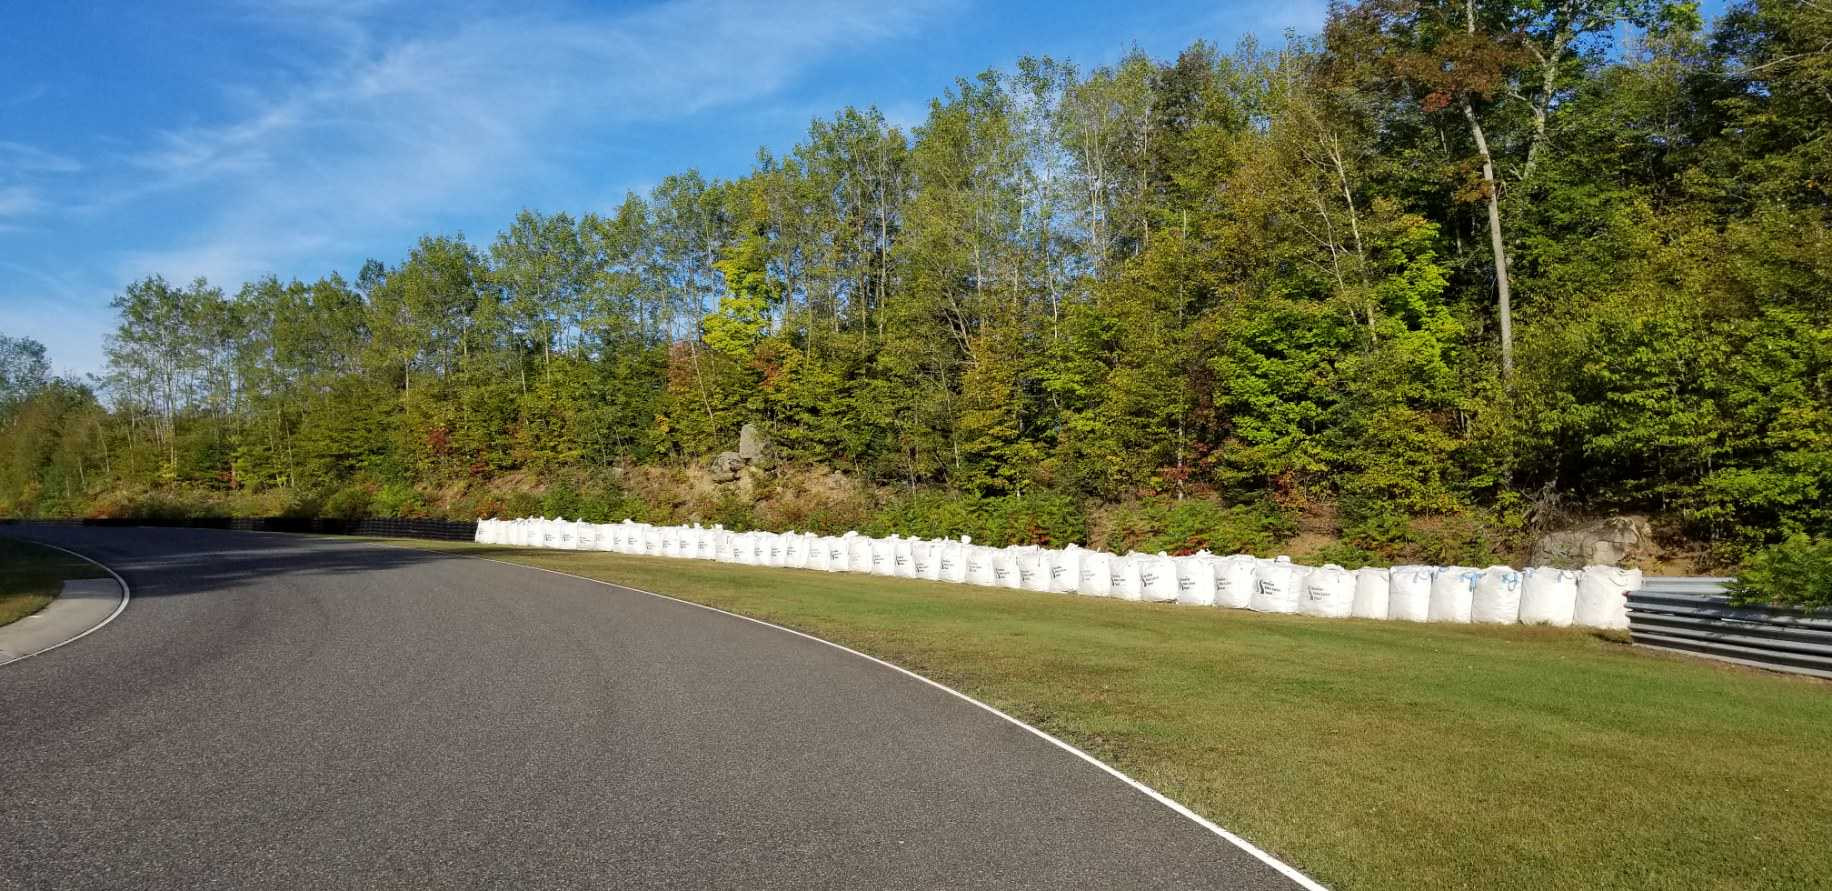 Canadian Rider Fund (CRF) Bottle Bag safety barriers in place trackside in the Turn 13 “Throat” section at Calabogie Motorsports Park, as seen in 2021. Photo courtesy CSBK.